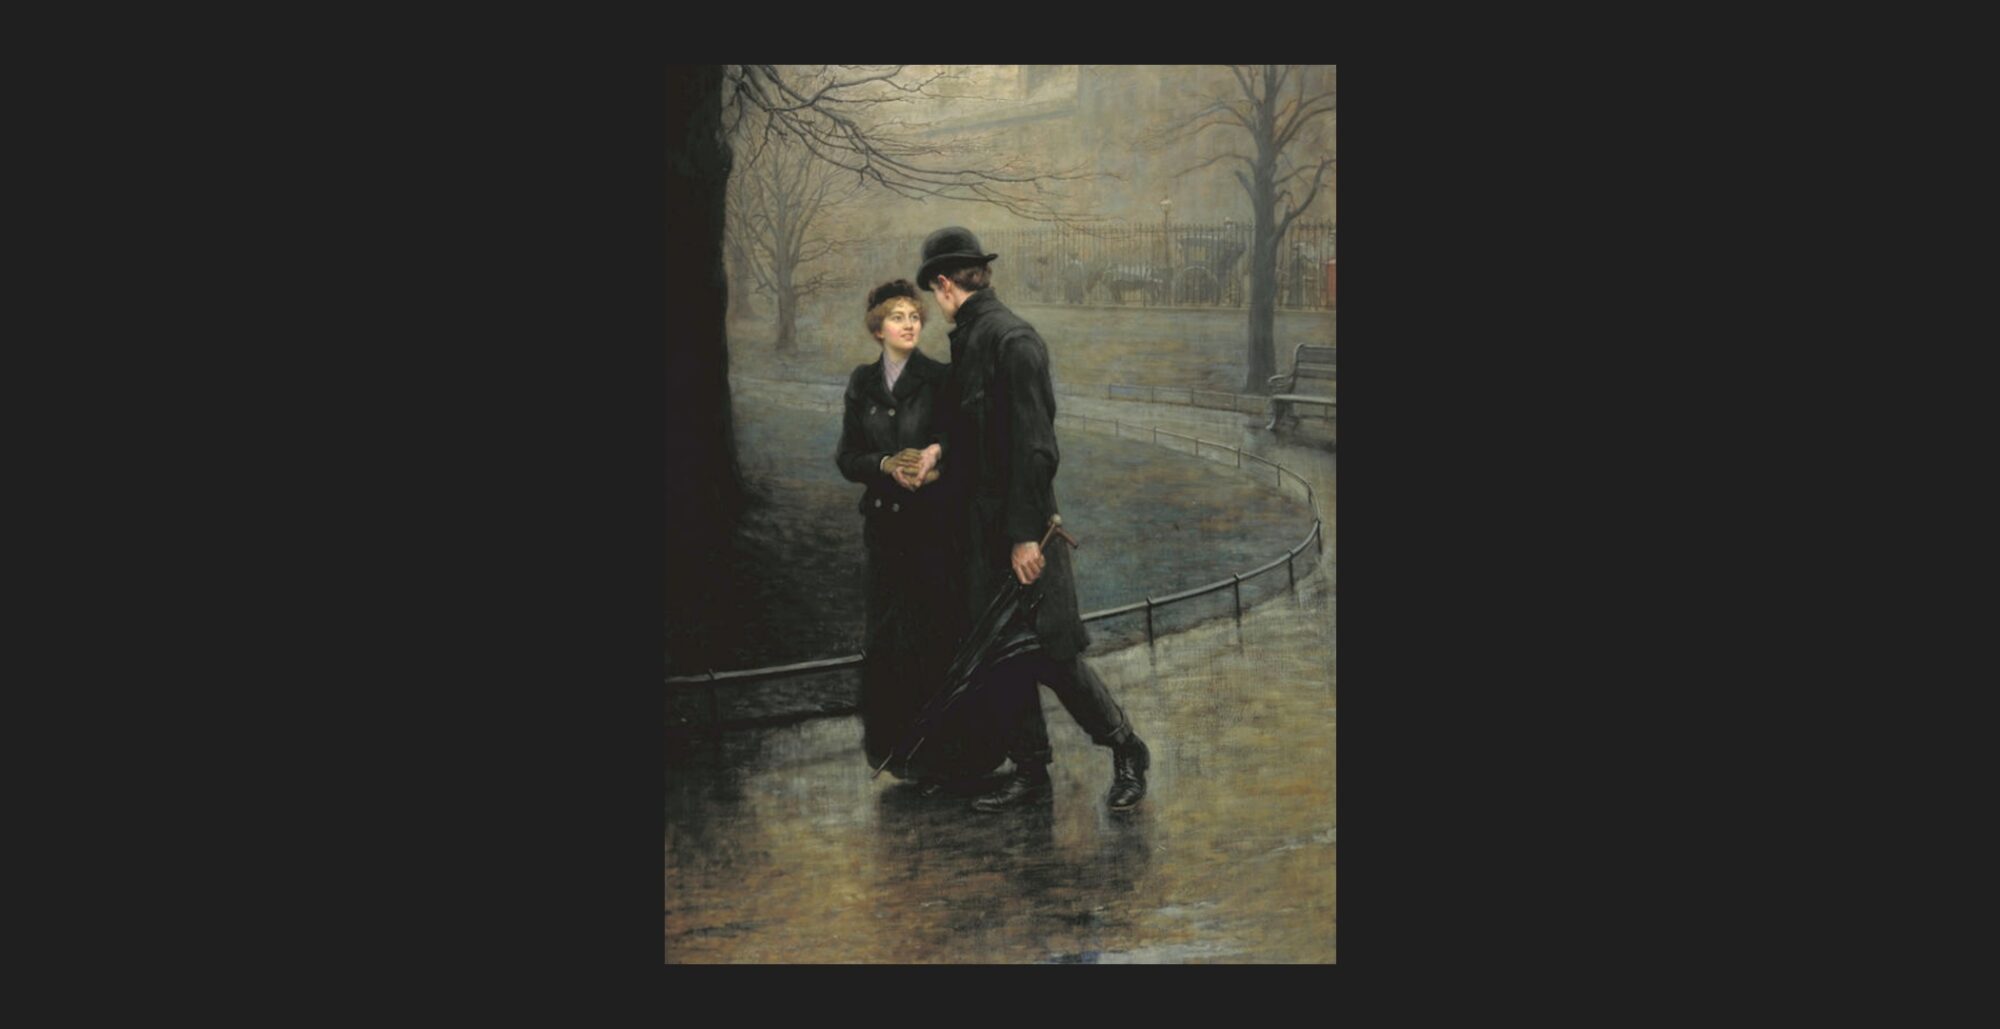 Painting of a couple smartly dresses walking through a park - 'The Garden of Eden', Riviere, Hugh Goldwyn (1901)